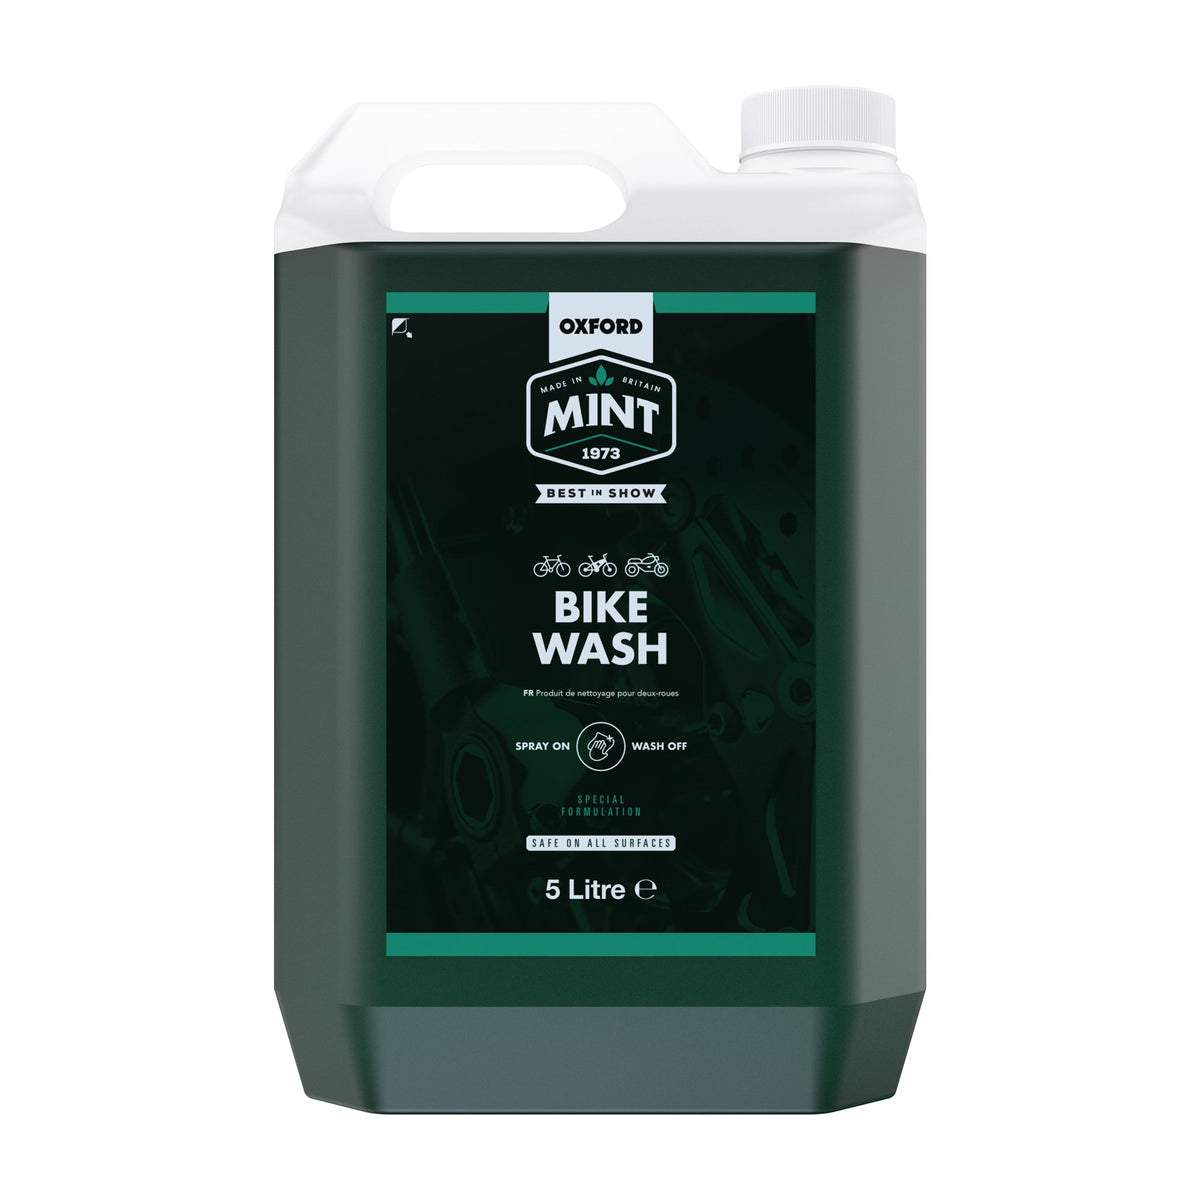 OXFORD MINT ALL PURPOSE MOTORCYCLE MOTORBIKE CLEAN WASH DIRT GRIME 1L 5L